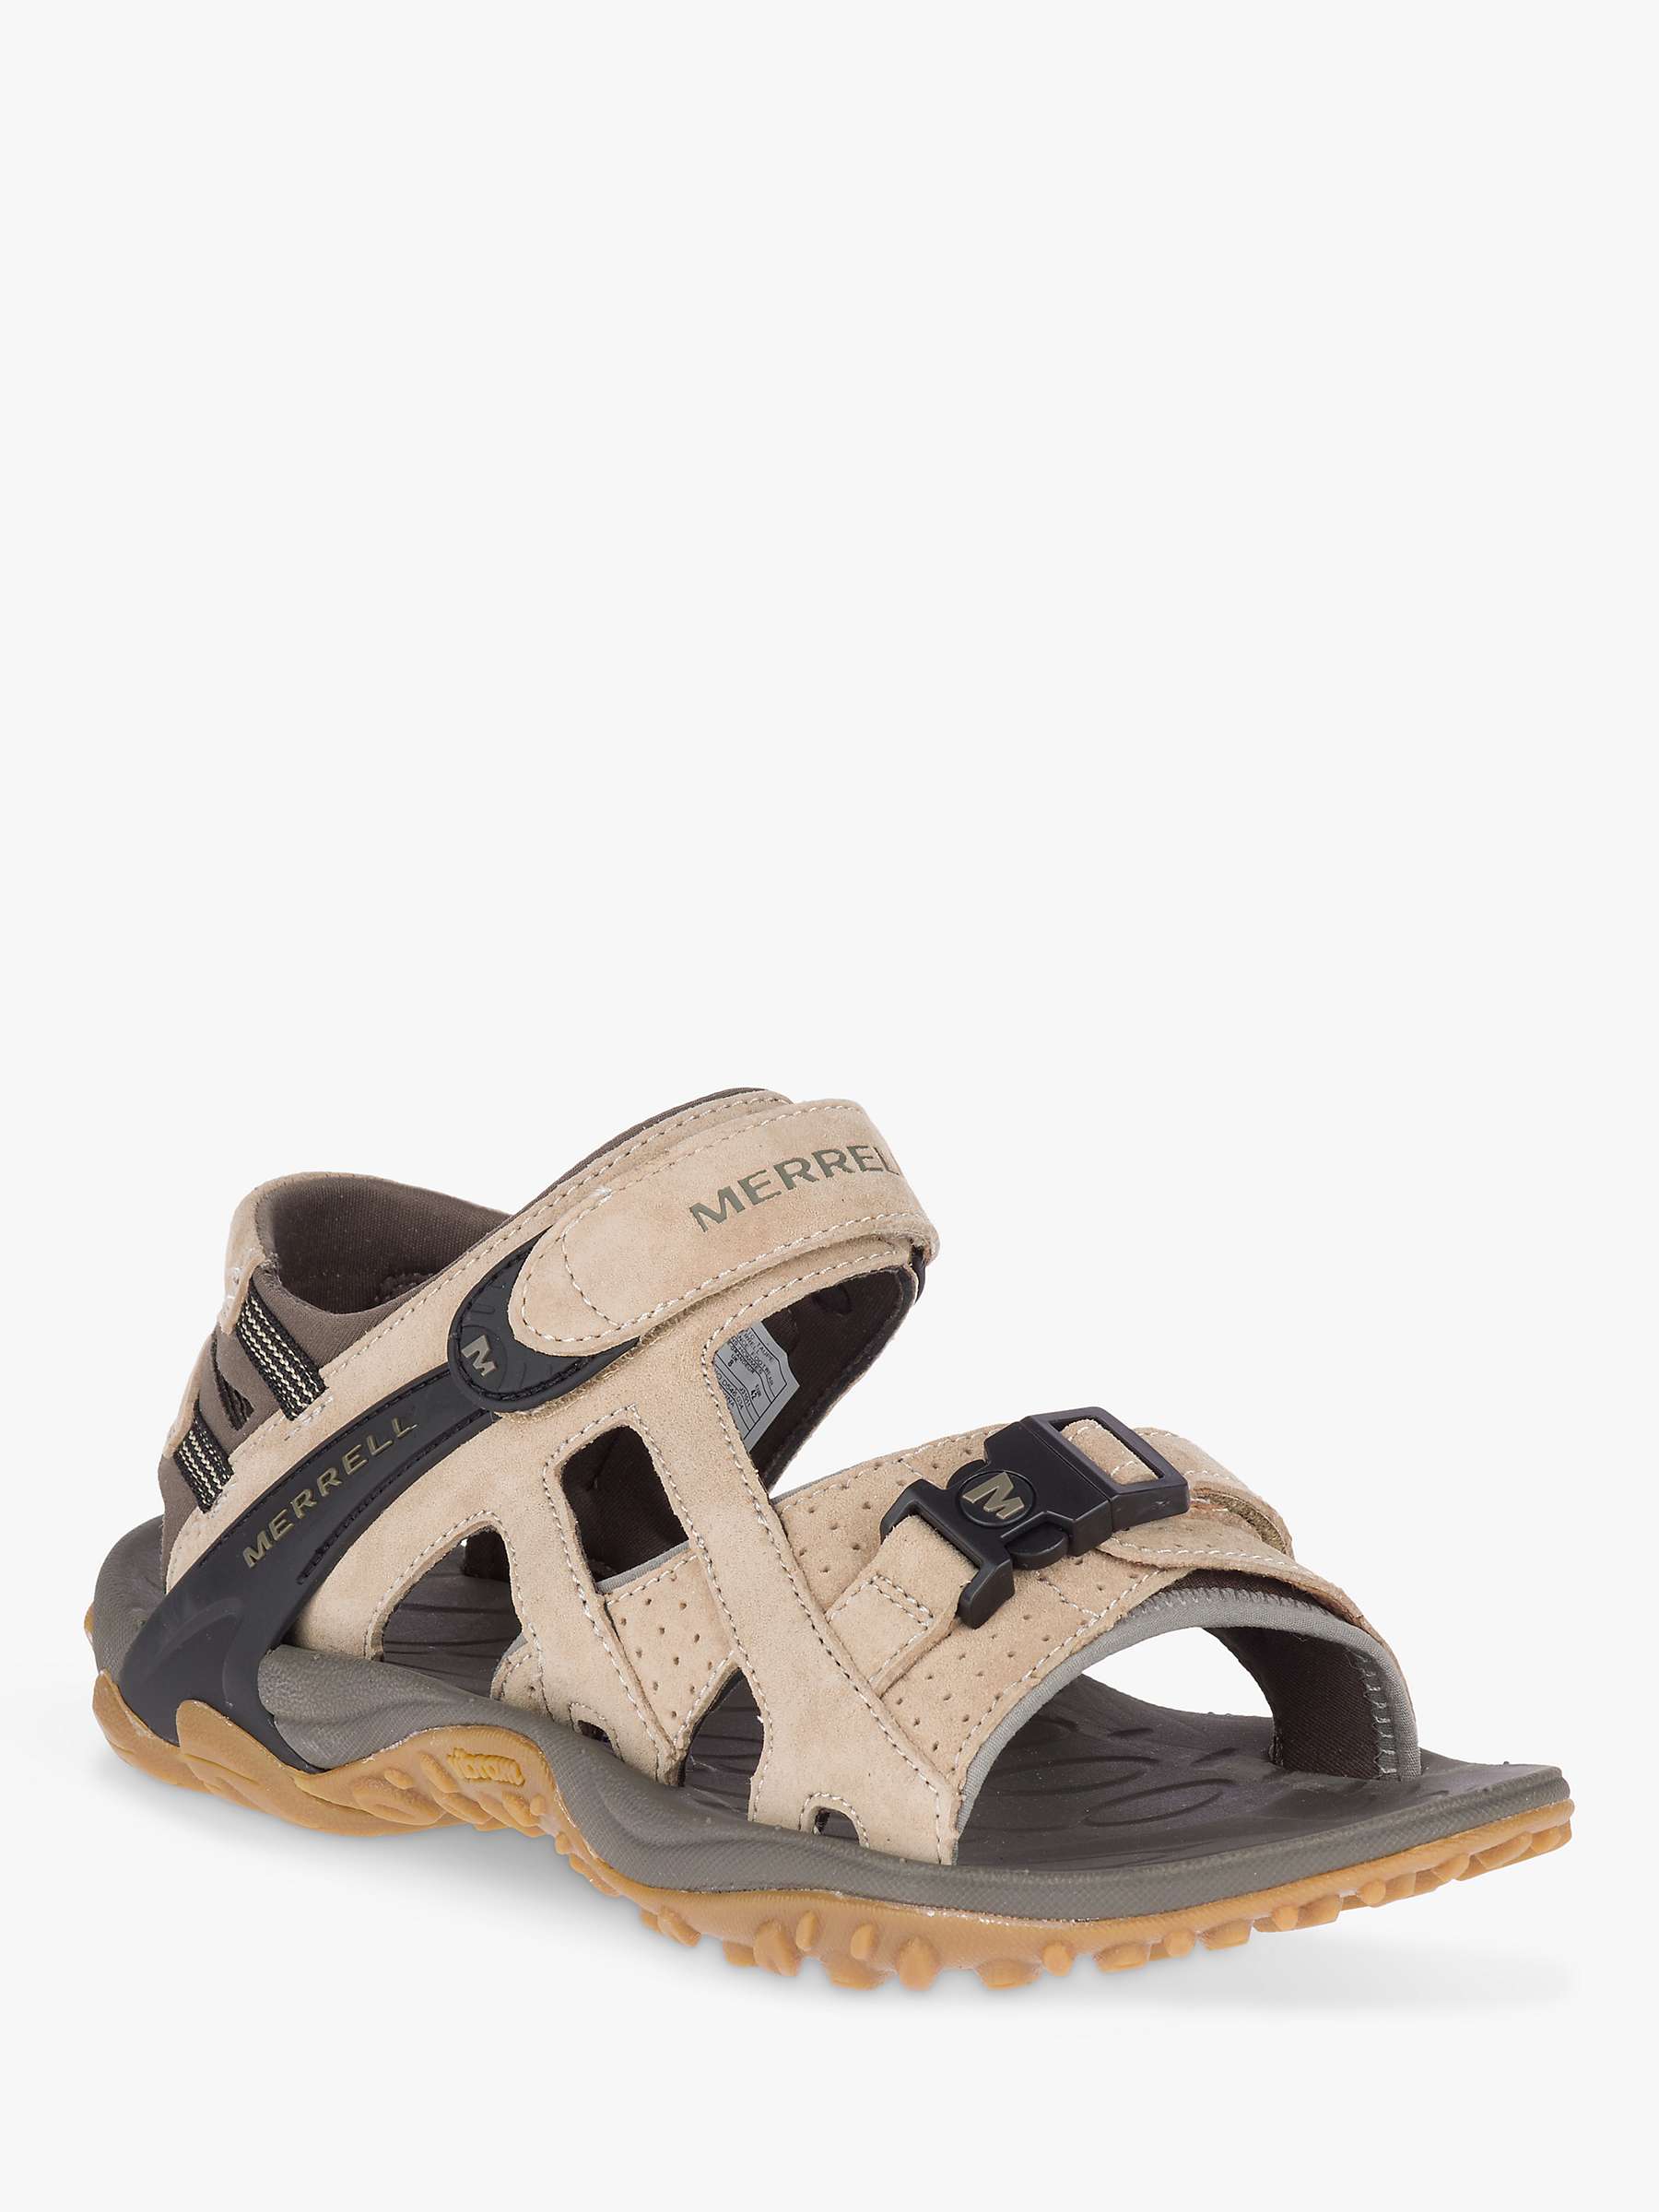 Buy Merrell Kahuna 3 Men's Sandals, Classic Taupe Online at johnlewis.com